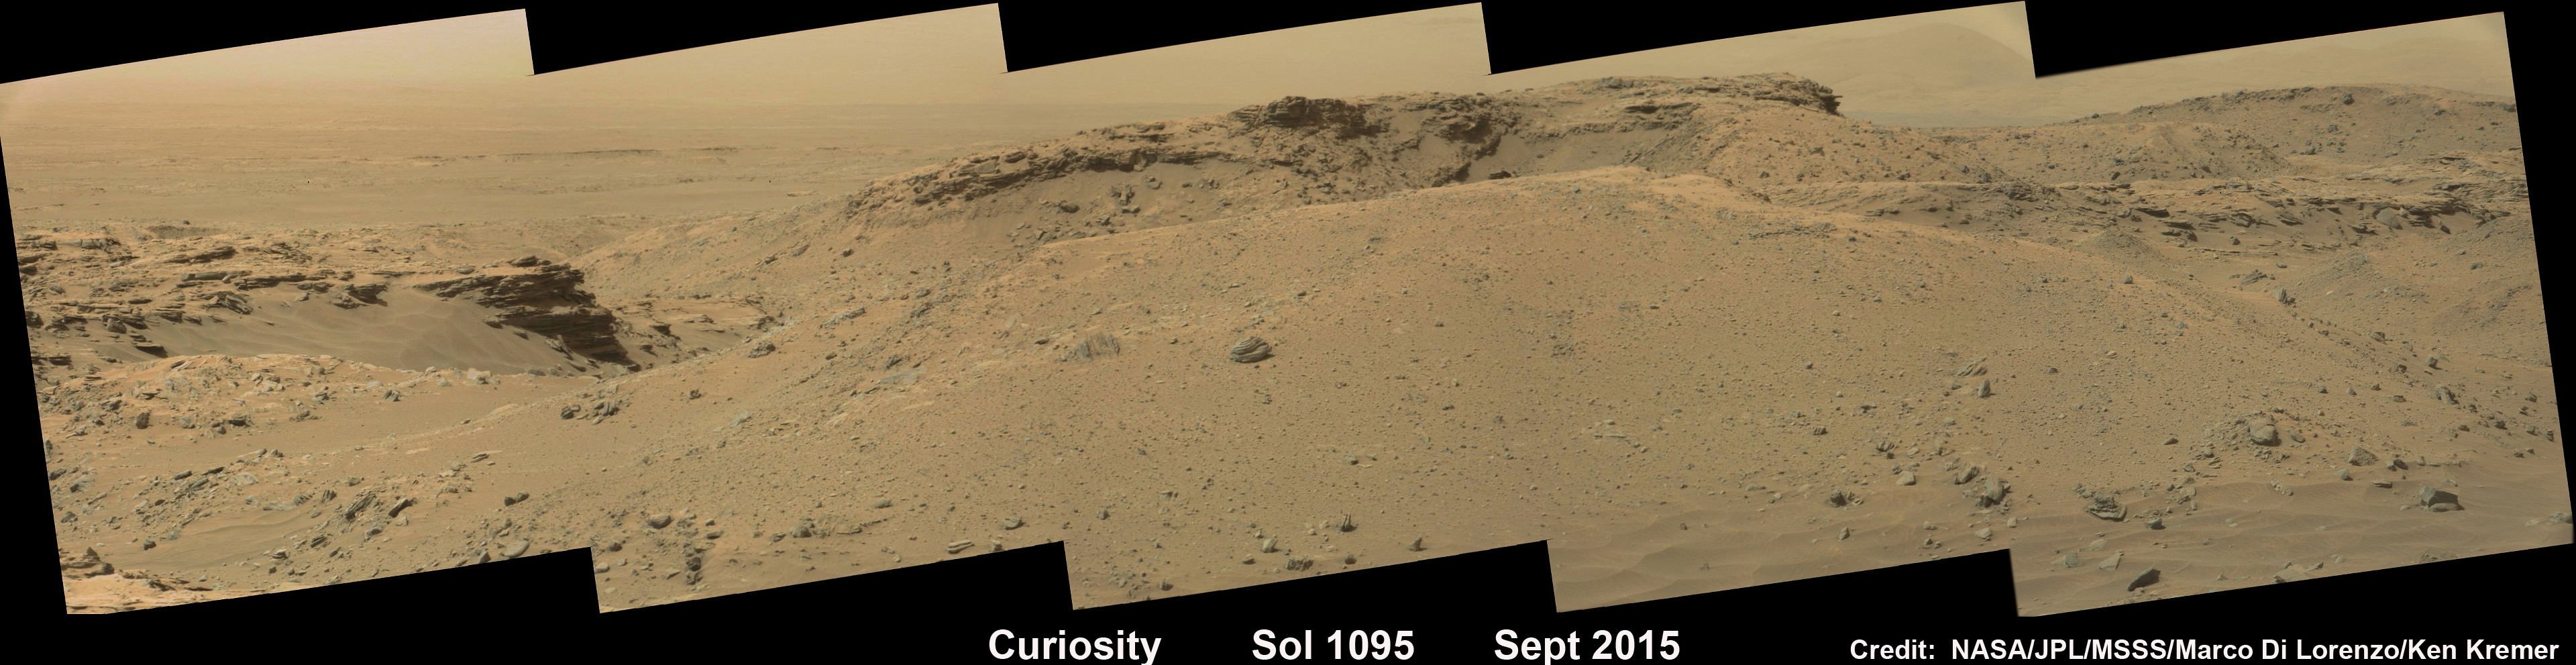 Curiosity rover explores around the Stimson unit at the base of Mount Sharp on Mars on Sol 1095, Sept. 5, 2015 in this photo mosaic stitched from Mastcam color camera raw images.  Credit: NASA/JPL/MSSS/Marco Di Lorenzo/Ken Kremer/kenkremer.com 